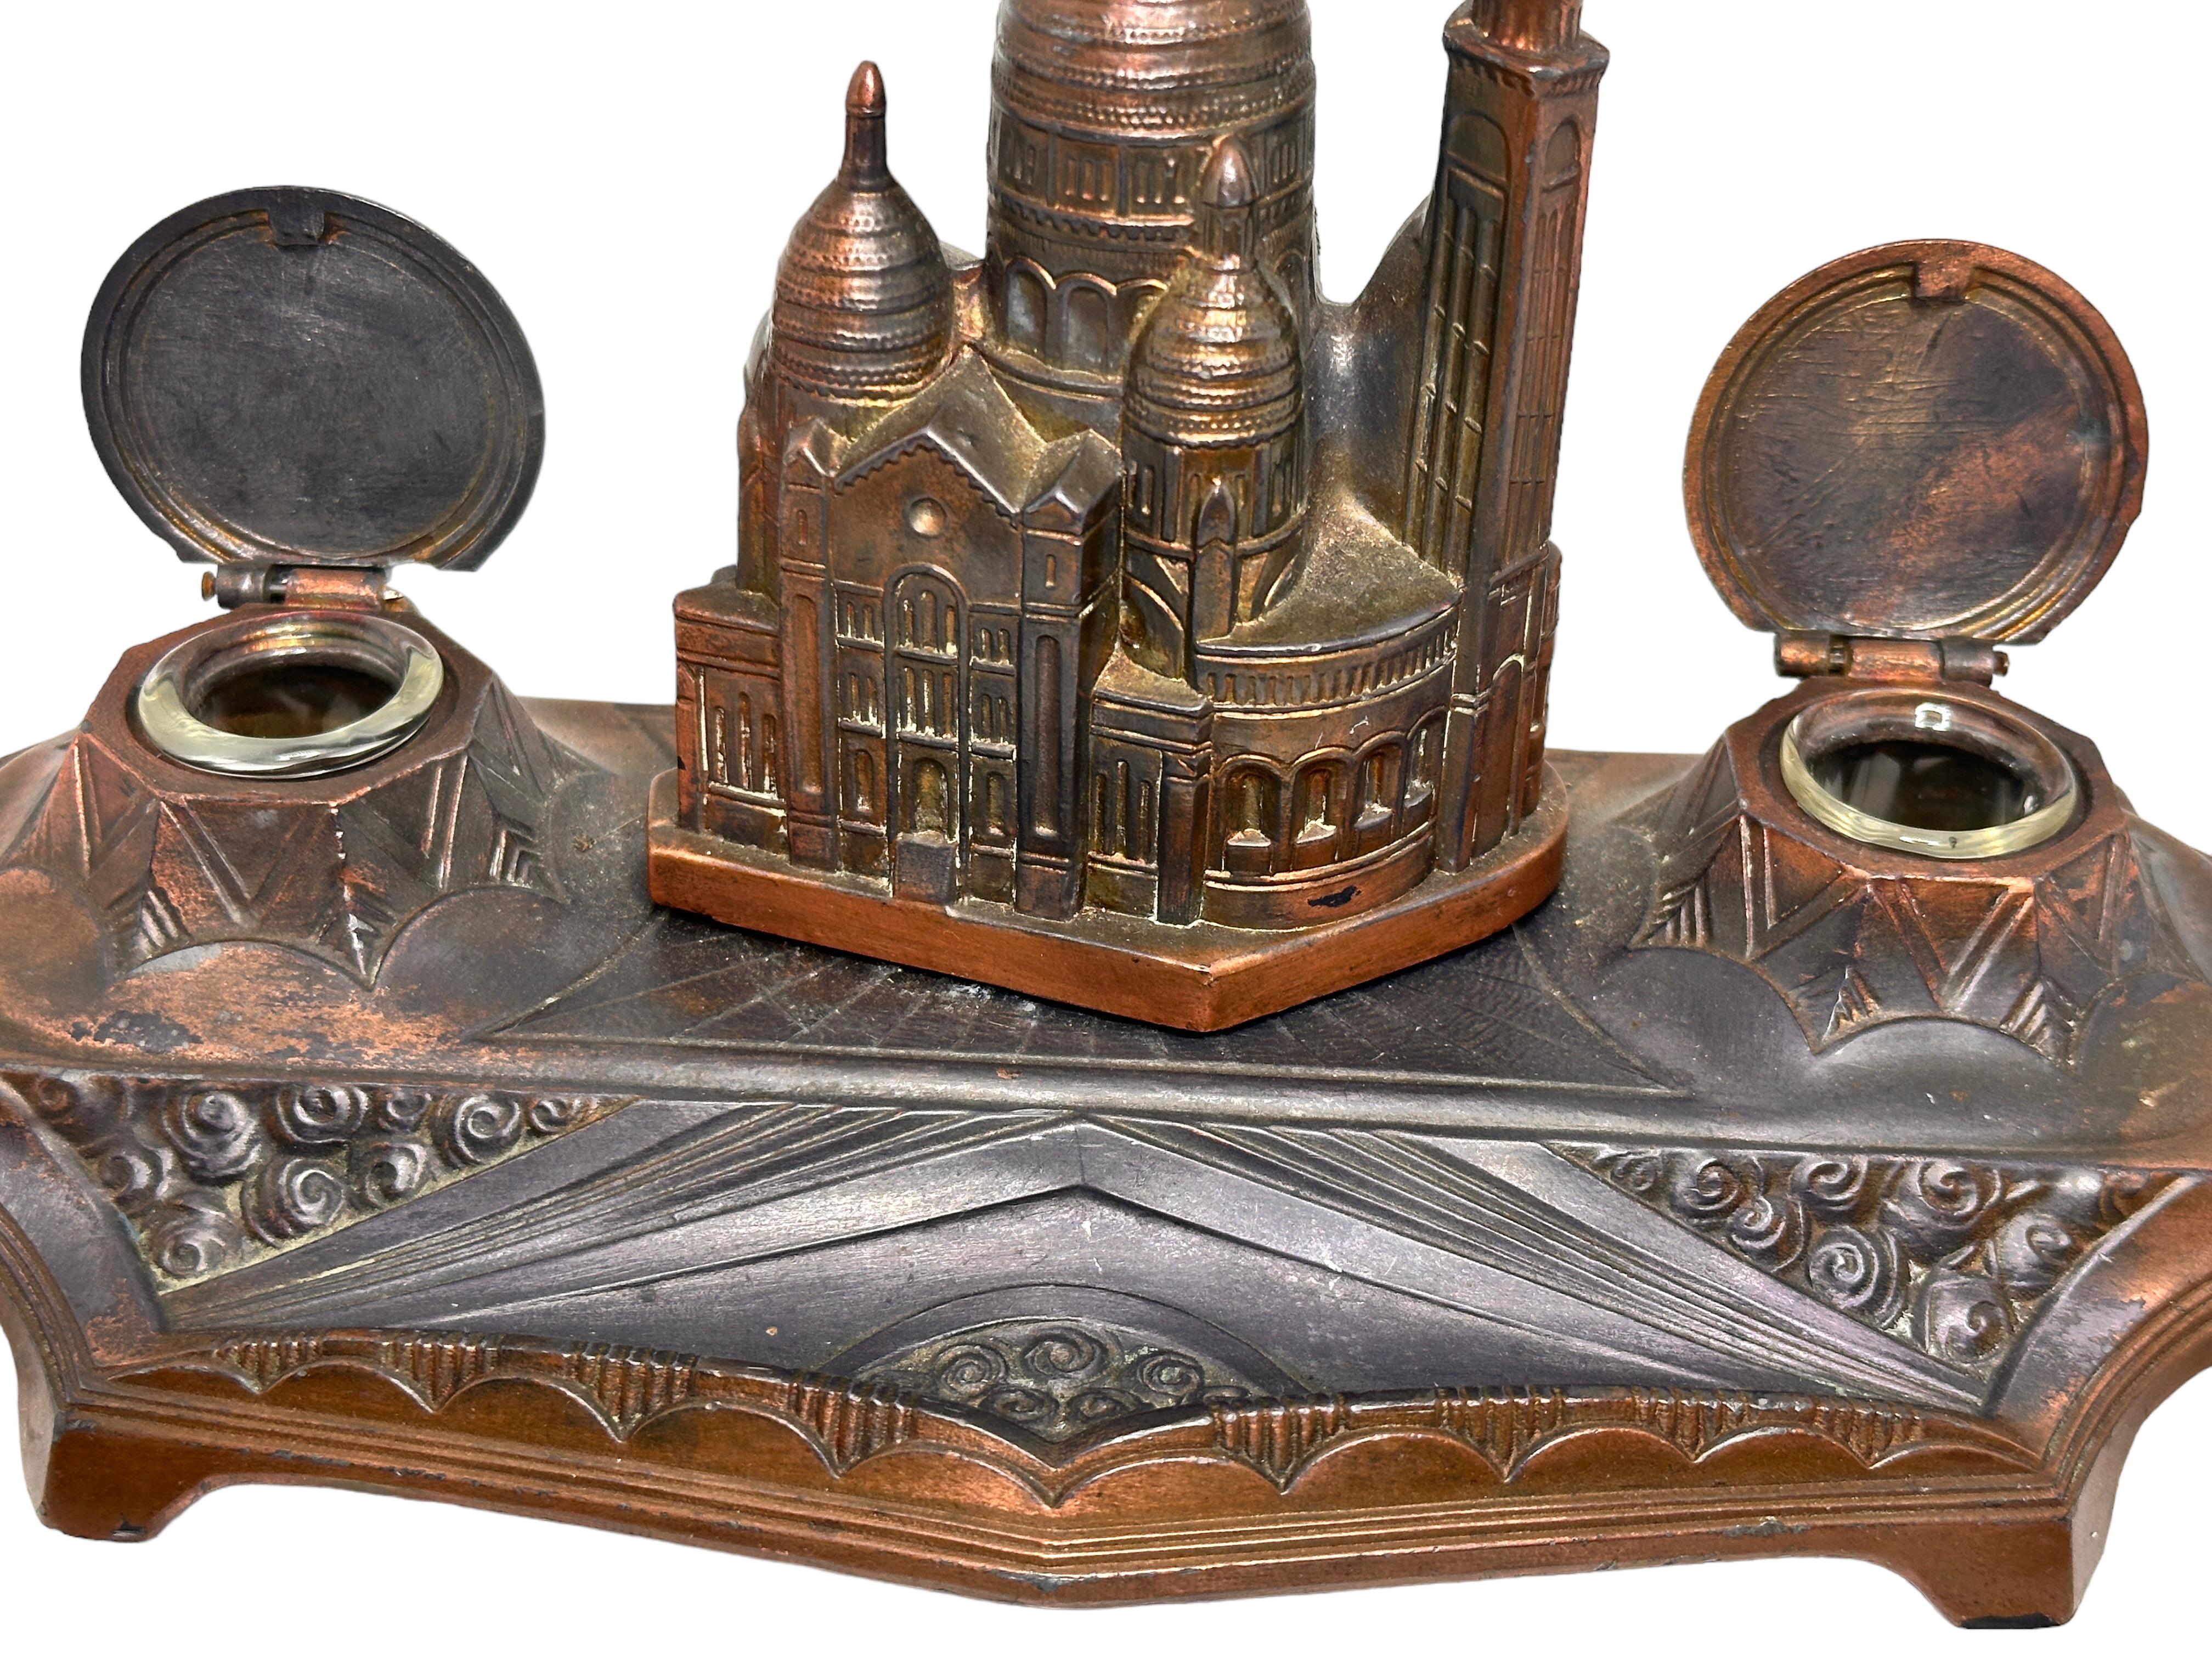 Classic early 1900s - 1910s double inkwell, with a souvenir building of The Basilica of the Sacred Heart of Paris. Nice addition to your writing desk or just to display them in your room. Found at an estate sale in Vienna, Austria. 
The Inkwell is